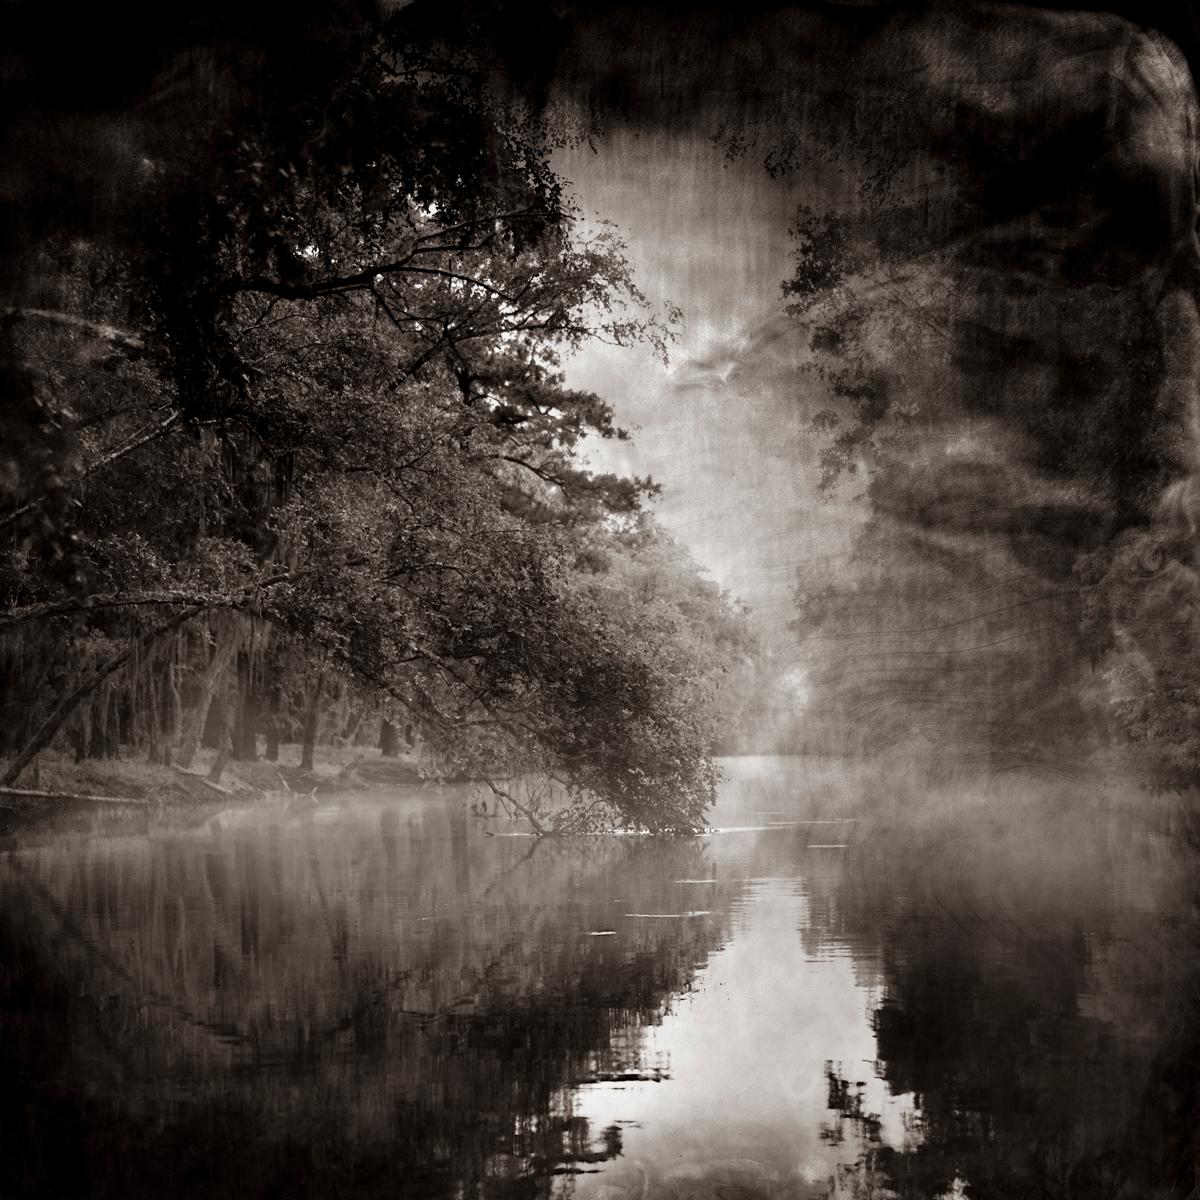 Keith Carter b.1948 Landscape Photograph - Angelina by Keith Carter, 2021, Archival Pigment Print